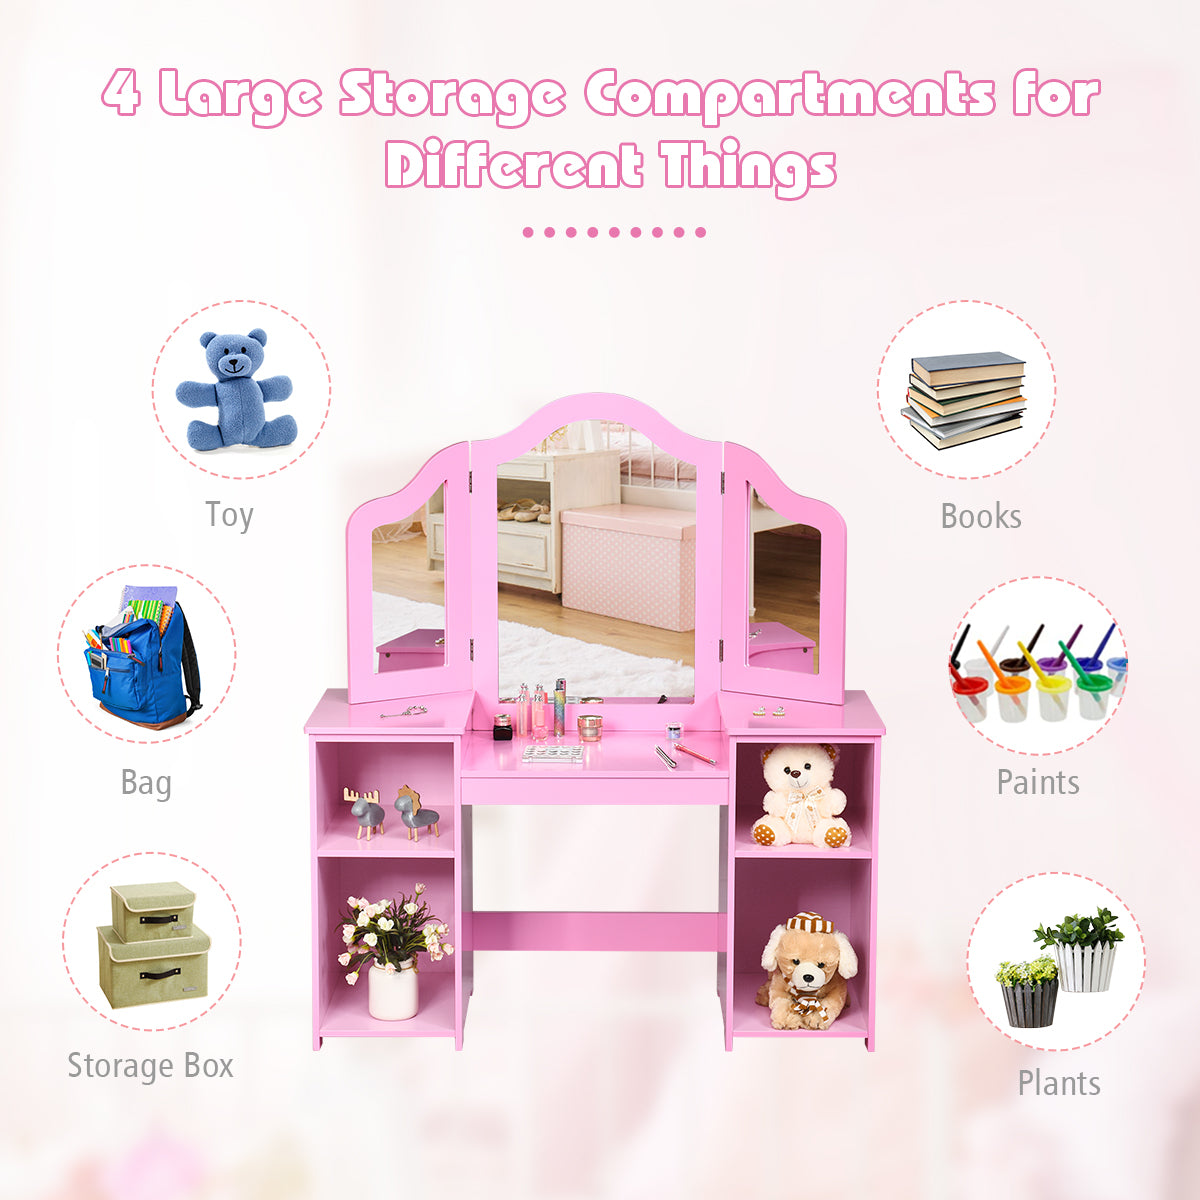 Spacious Storage Space: The dressing table contains spacious desktop and 2 oversized lockers with compartments in the middle. It keeps the children's items neat, such as storing their own jewelries, cosmetics, books, toys and other personal items. This design is conducive to cultivating children's habit of organizing items.